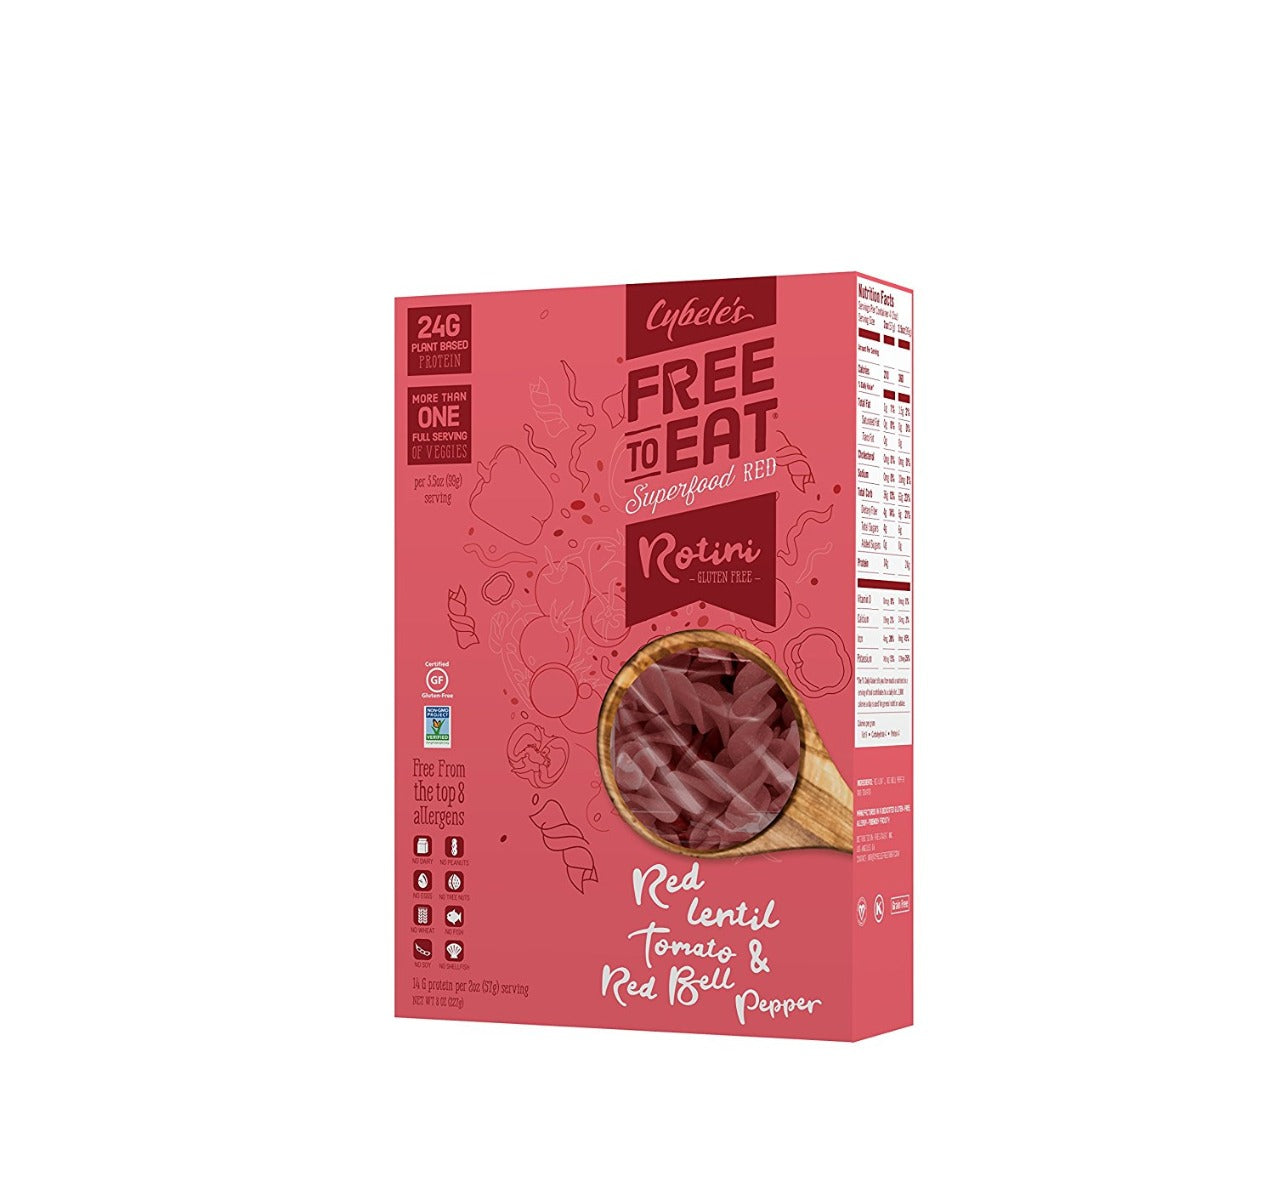 CYBELES SUPERFOOD PASTA: Superfood Red Pasta, 8 oz